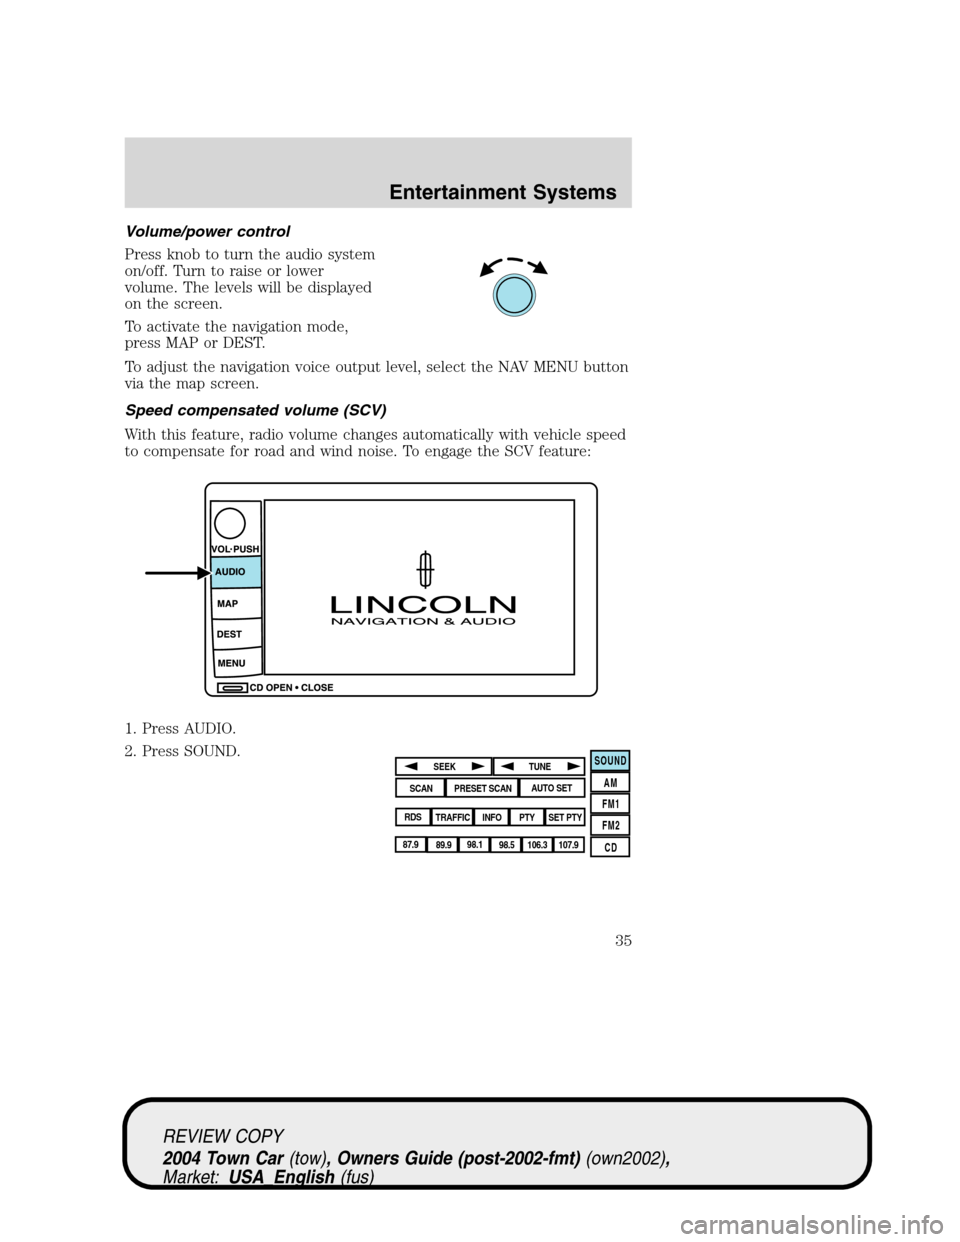 LINCOLN TOWN CAR 2004 Owners Guide Volume/power control
Press knob to turn the audio system
on/off. Turn to raise or lower
volume. The levels will be displayed
on the screen.
To activate the navigation mode,
press MAP or DEST.
To adjus